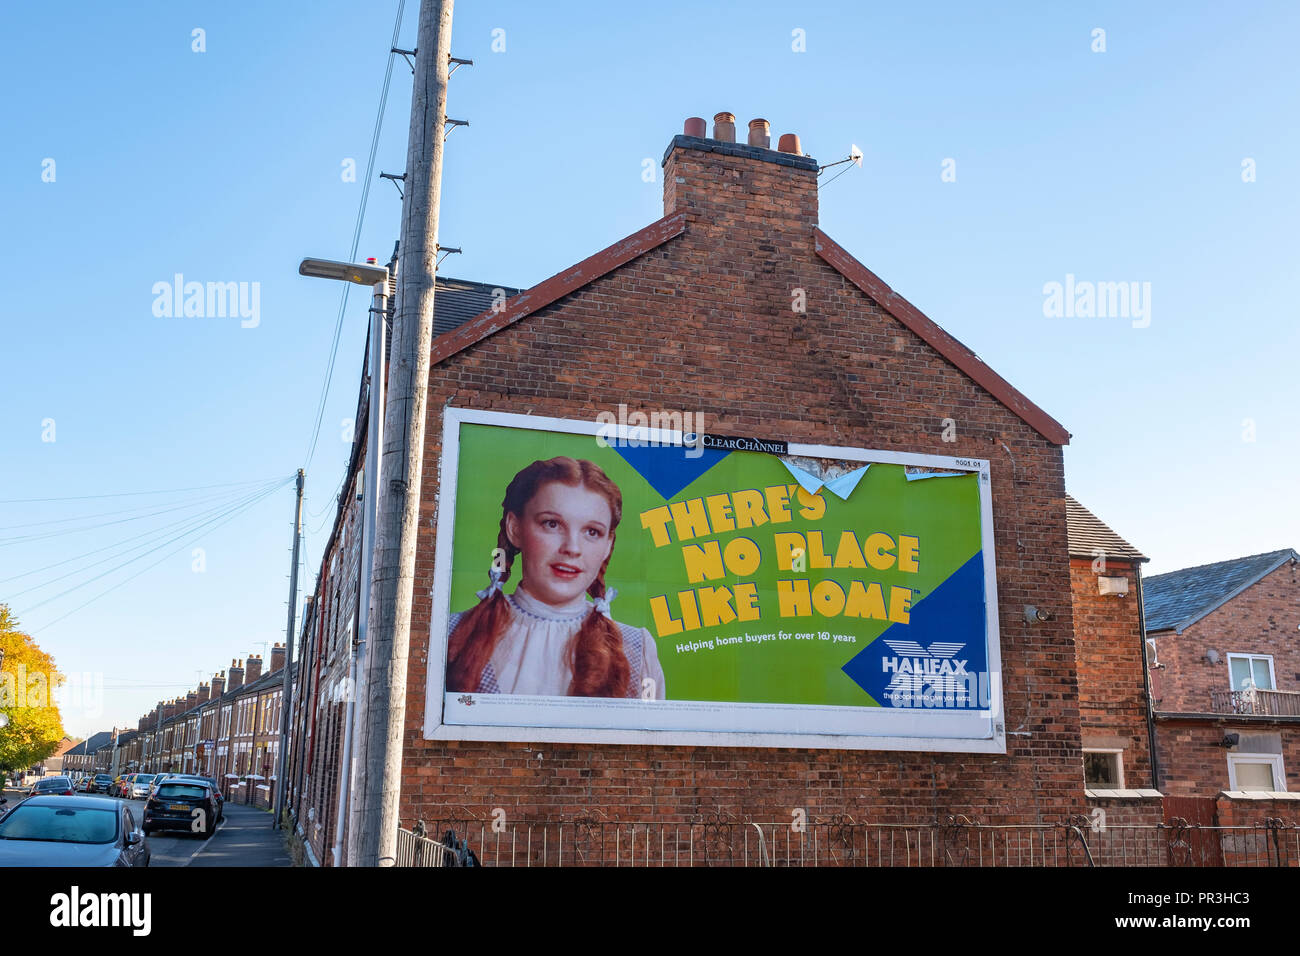 There,s no place like home , a Halifax billboard on outside wall in Crewe Cheshire UK Stock Photo